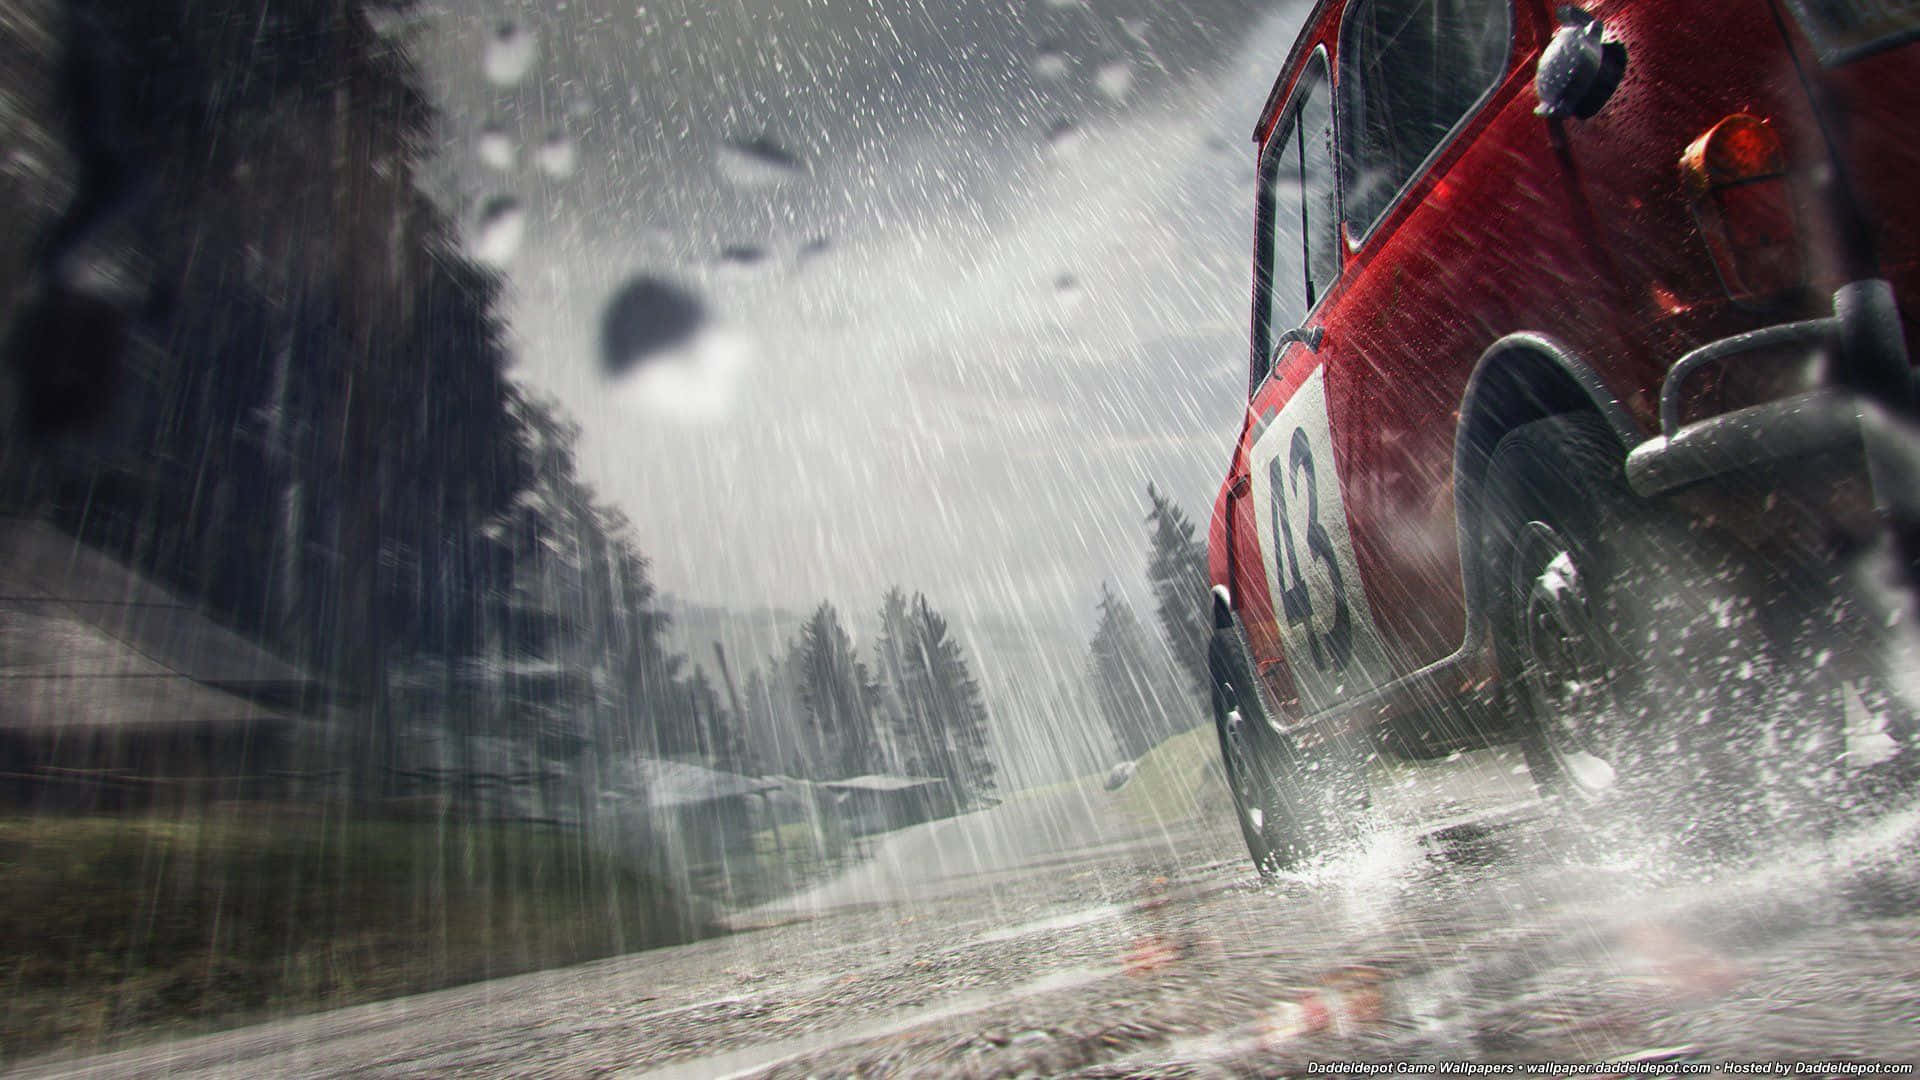 Experience the thrills of Dirt 3 in stunning 1080p resolution.